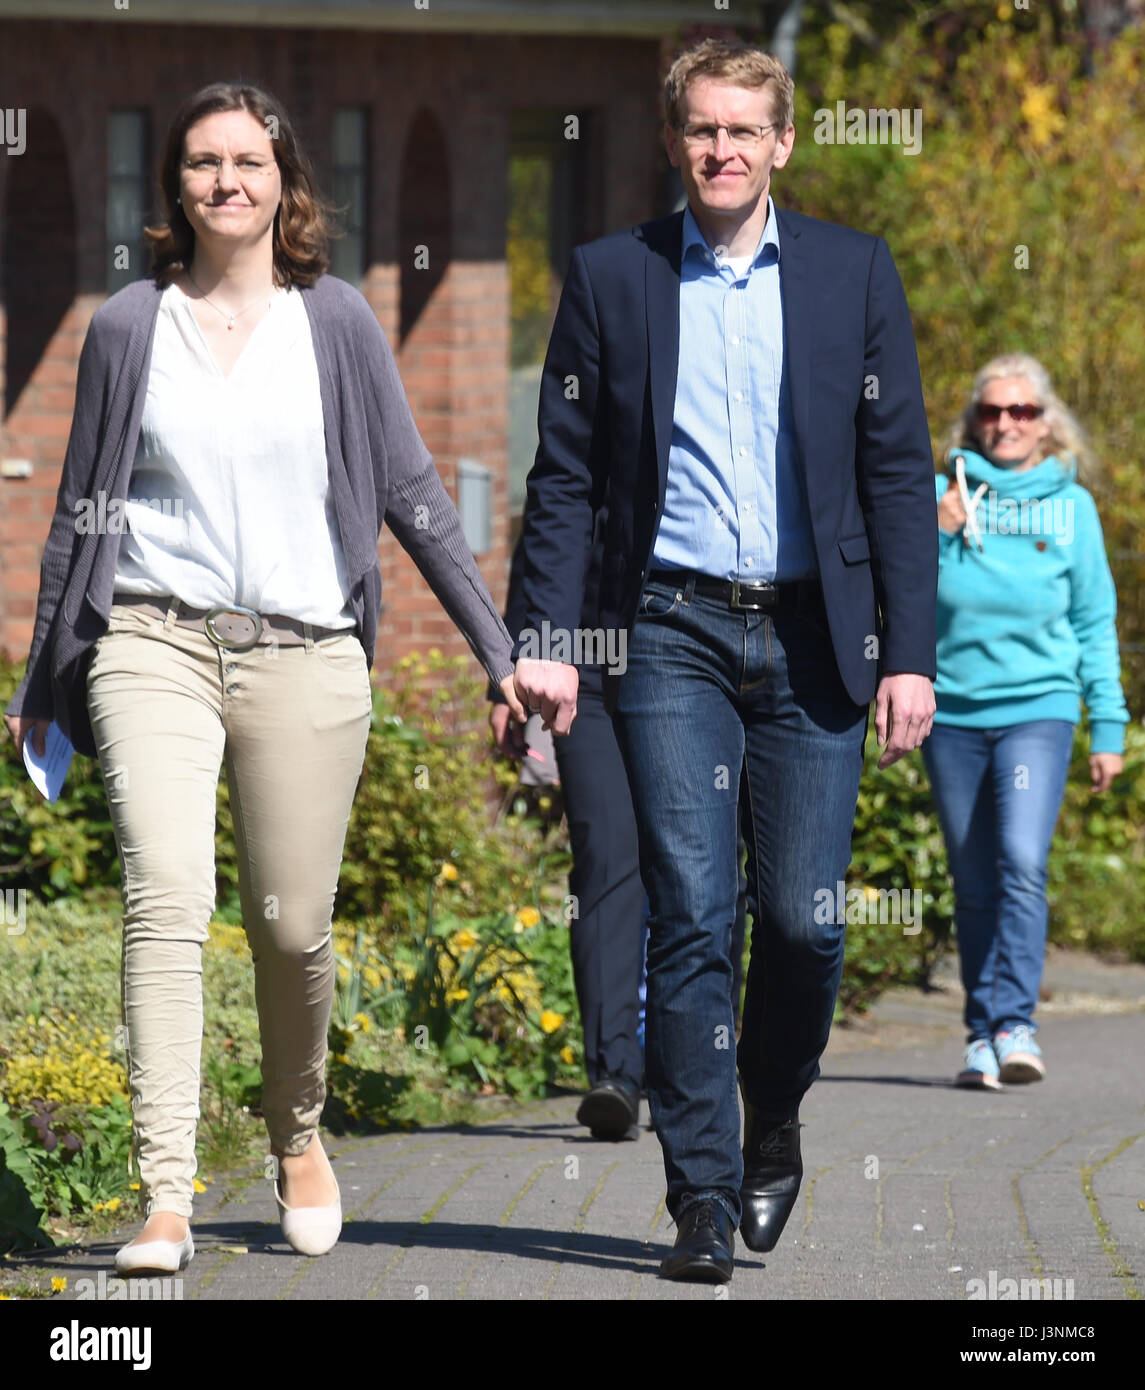 Eckernfoerde, Germany. 7th May, 2017. Daniel Guenther, leading candidate of  the CDU party, and his wife Anke arrive at a polling station in  Eckernfoerde, Germany, 7 May 2017. 2.32 million elligible voters